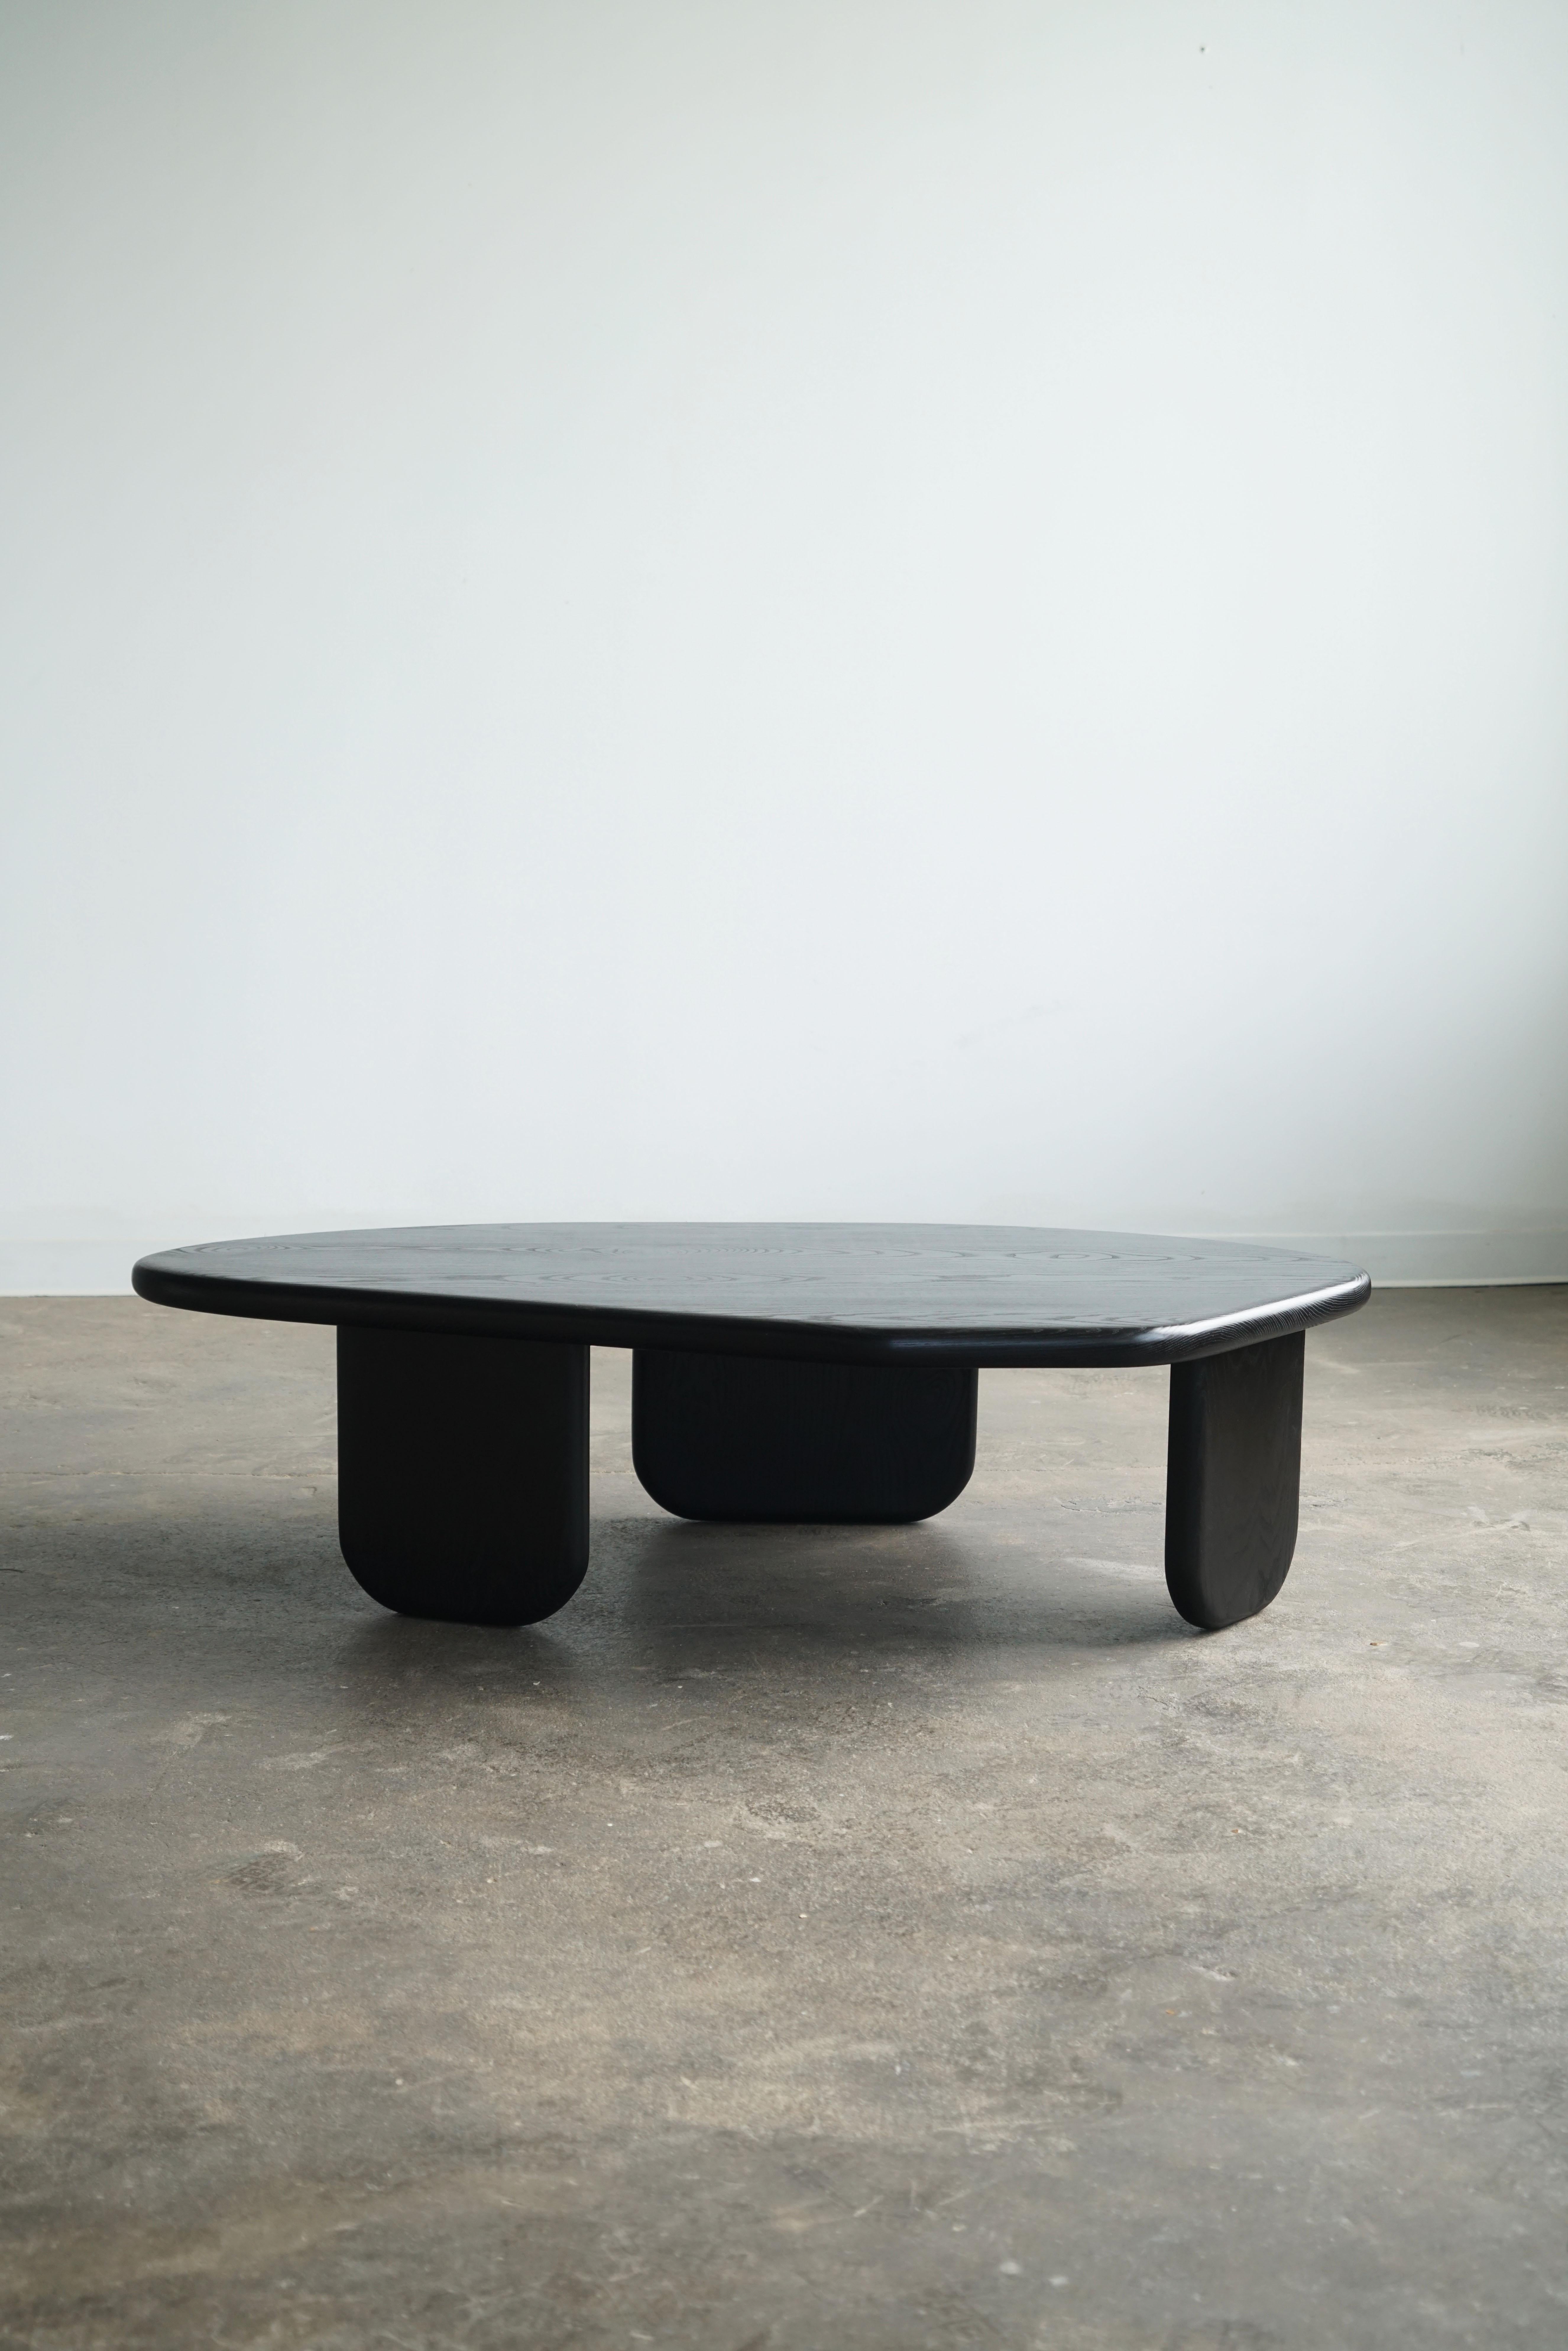 American Organic Shaped Modern Coffee Table by Last Workshop, Jet Black Ash For Sale